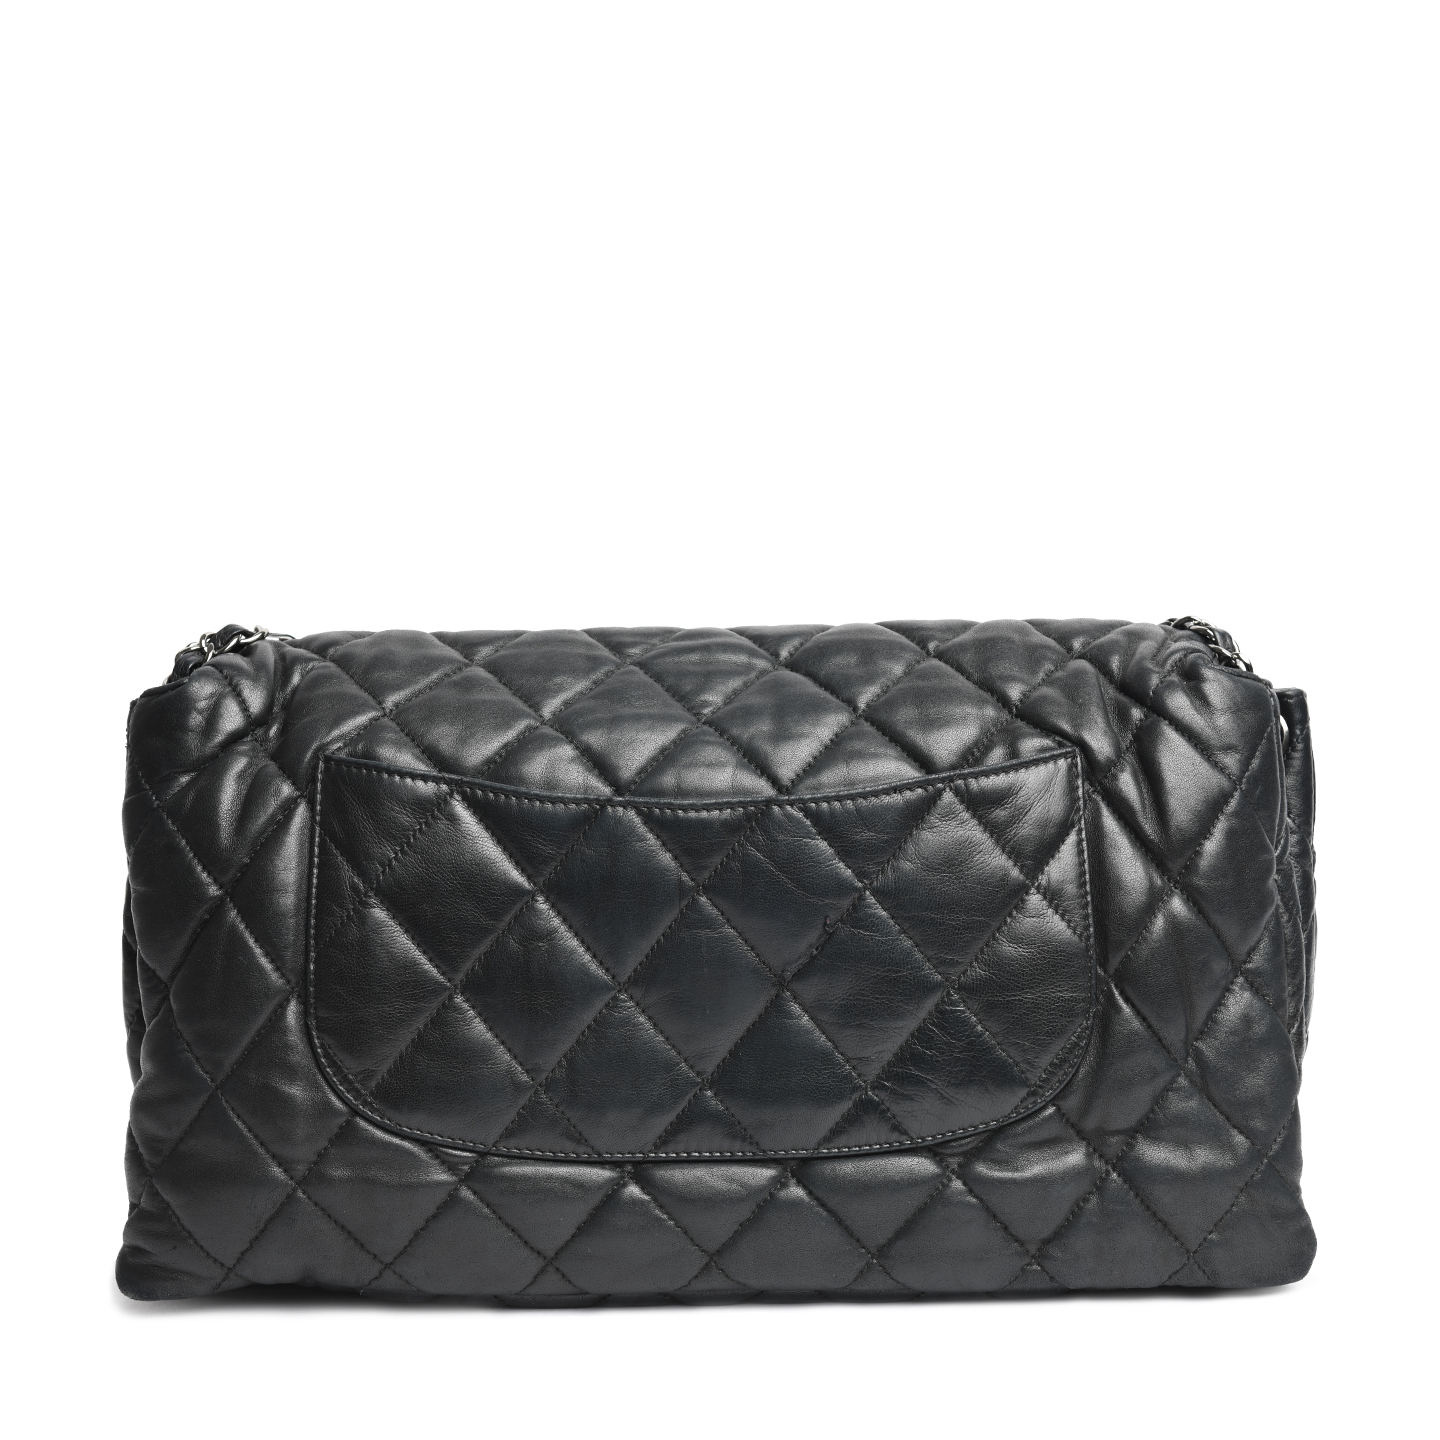 Chanel Lambskin Leather 3 Accordion Maxi Flap Bag - LabelCentric